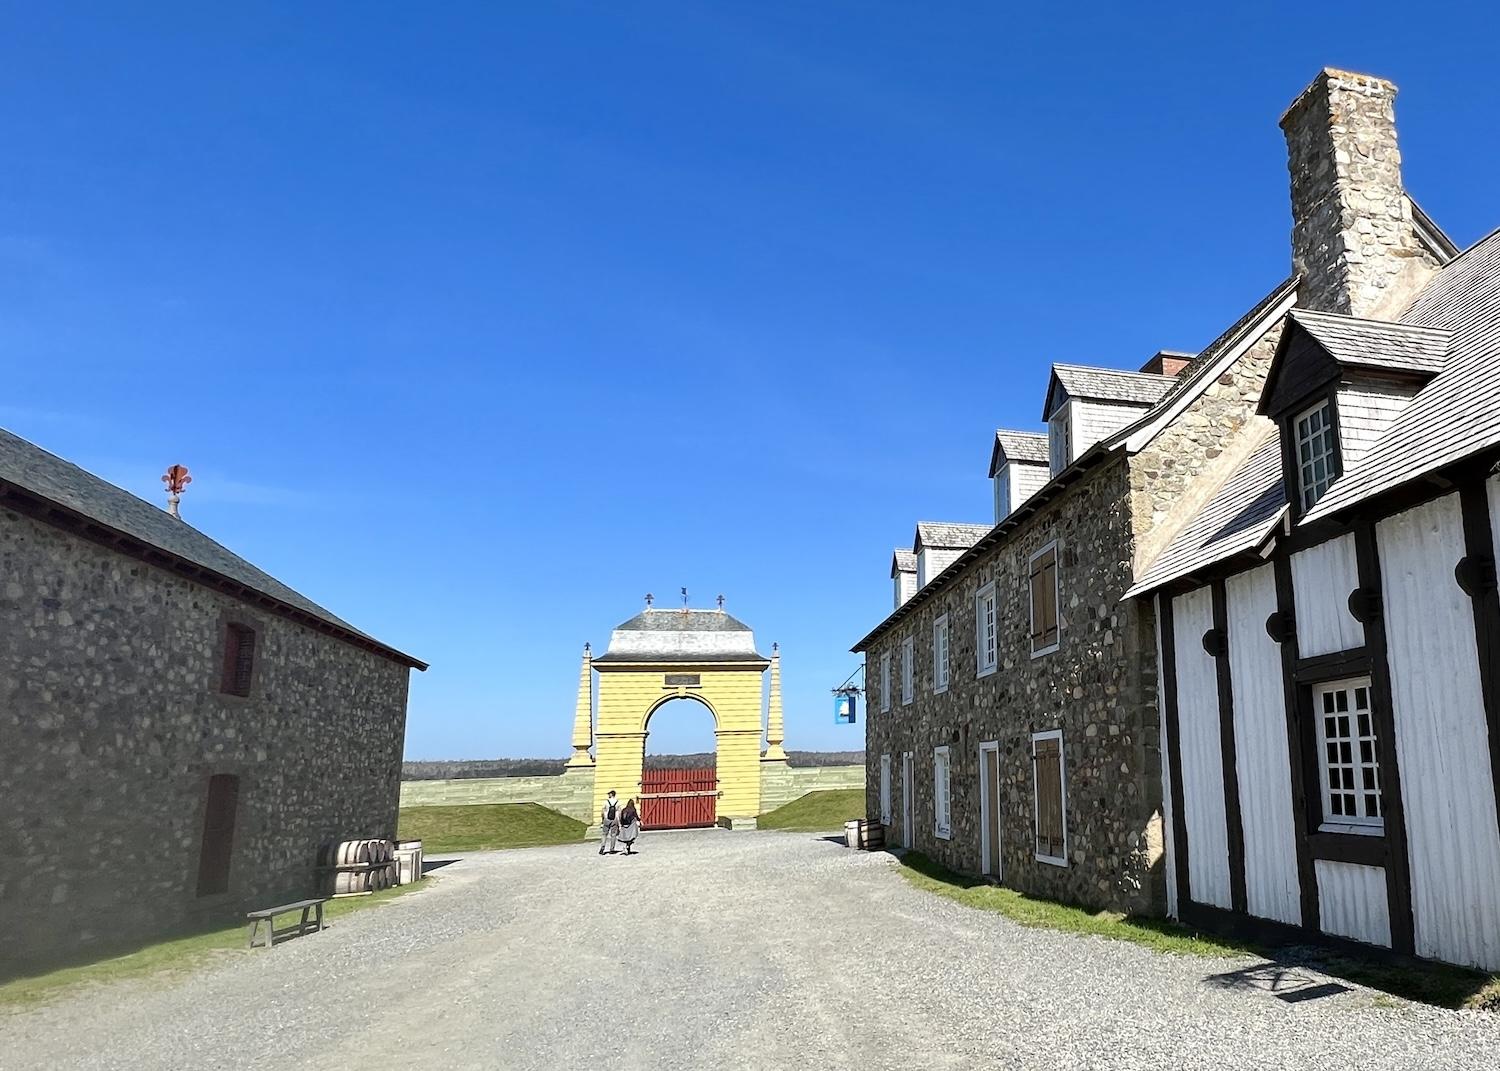 Photographers love shooting the yellow Frédéric Gate at the Fortress of Louisbourg National Historic Site.